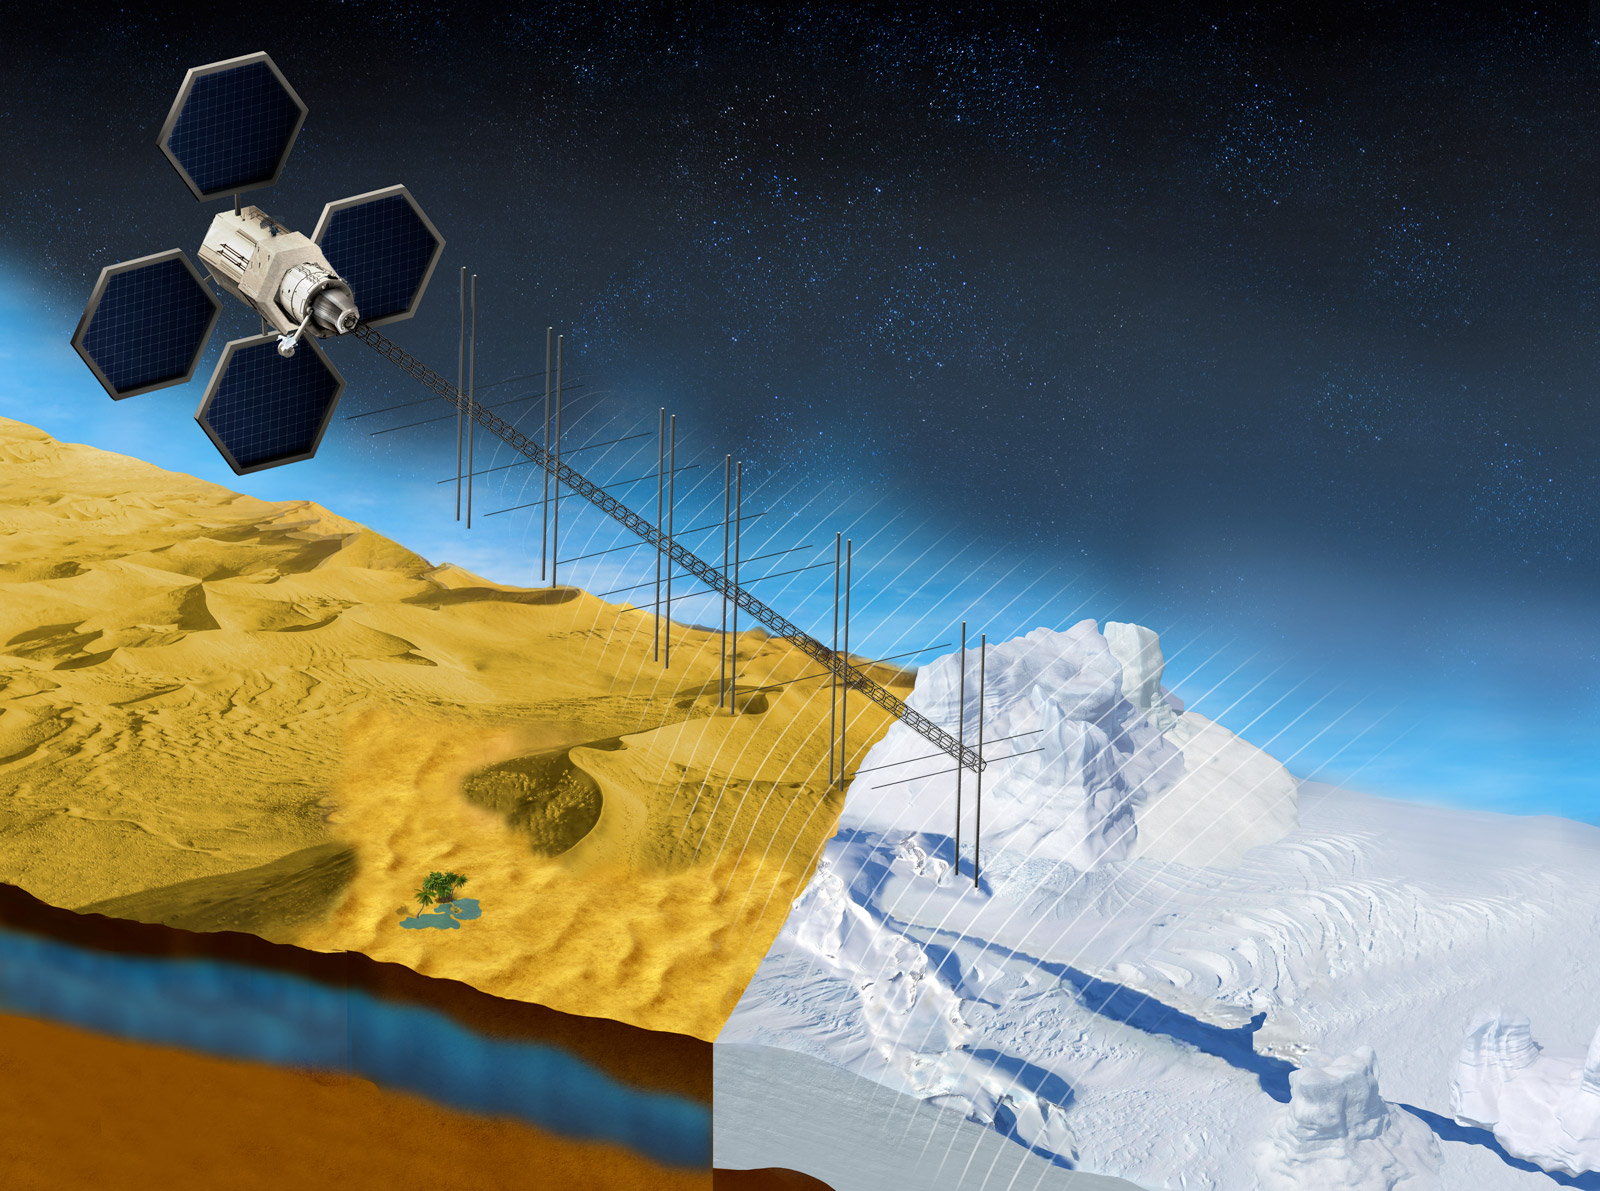 This illustration shows what a satellite with a proposed radar instrument for the mission could look like.